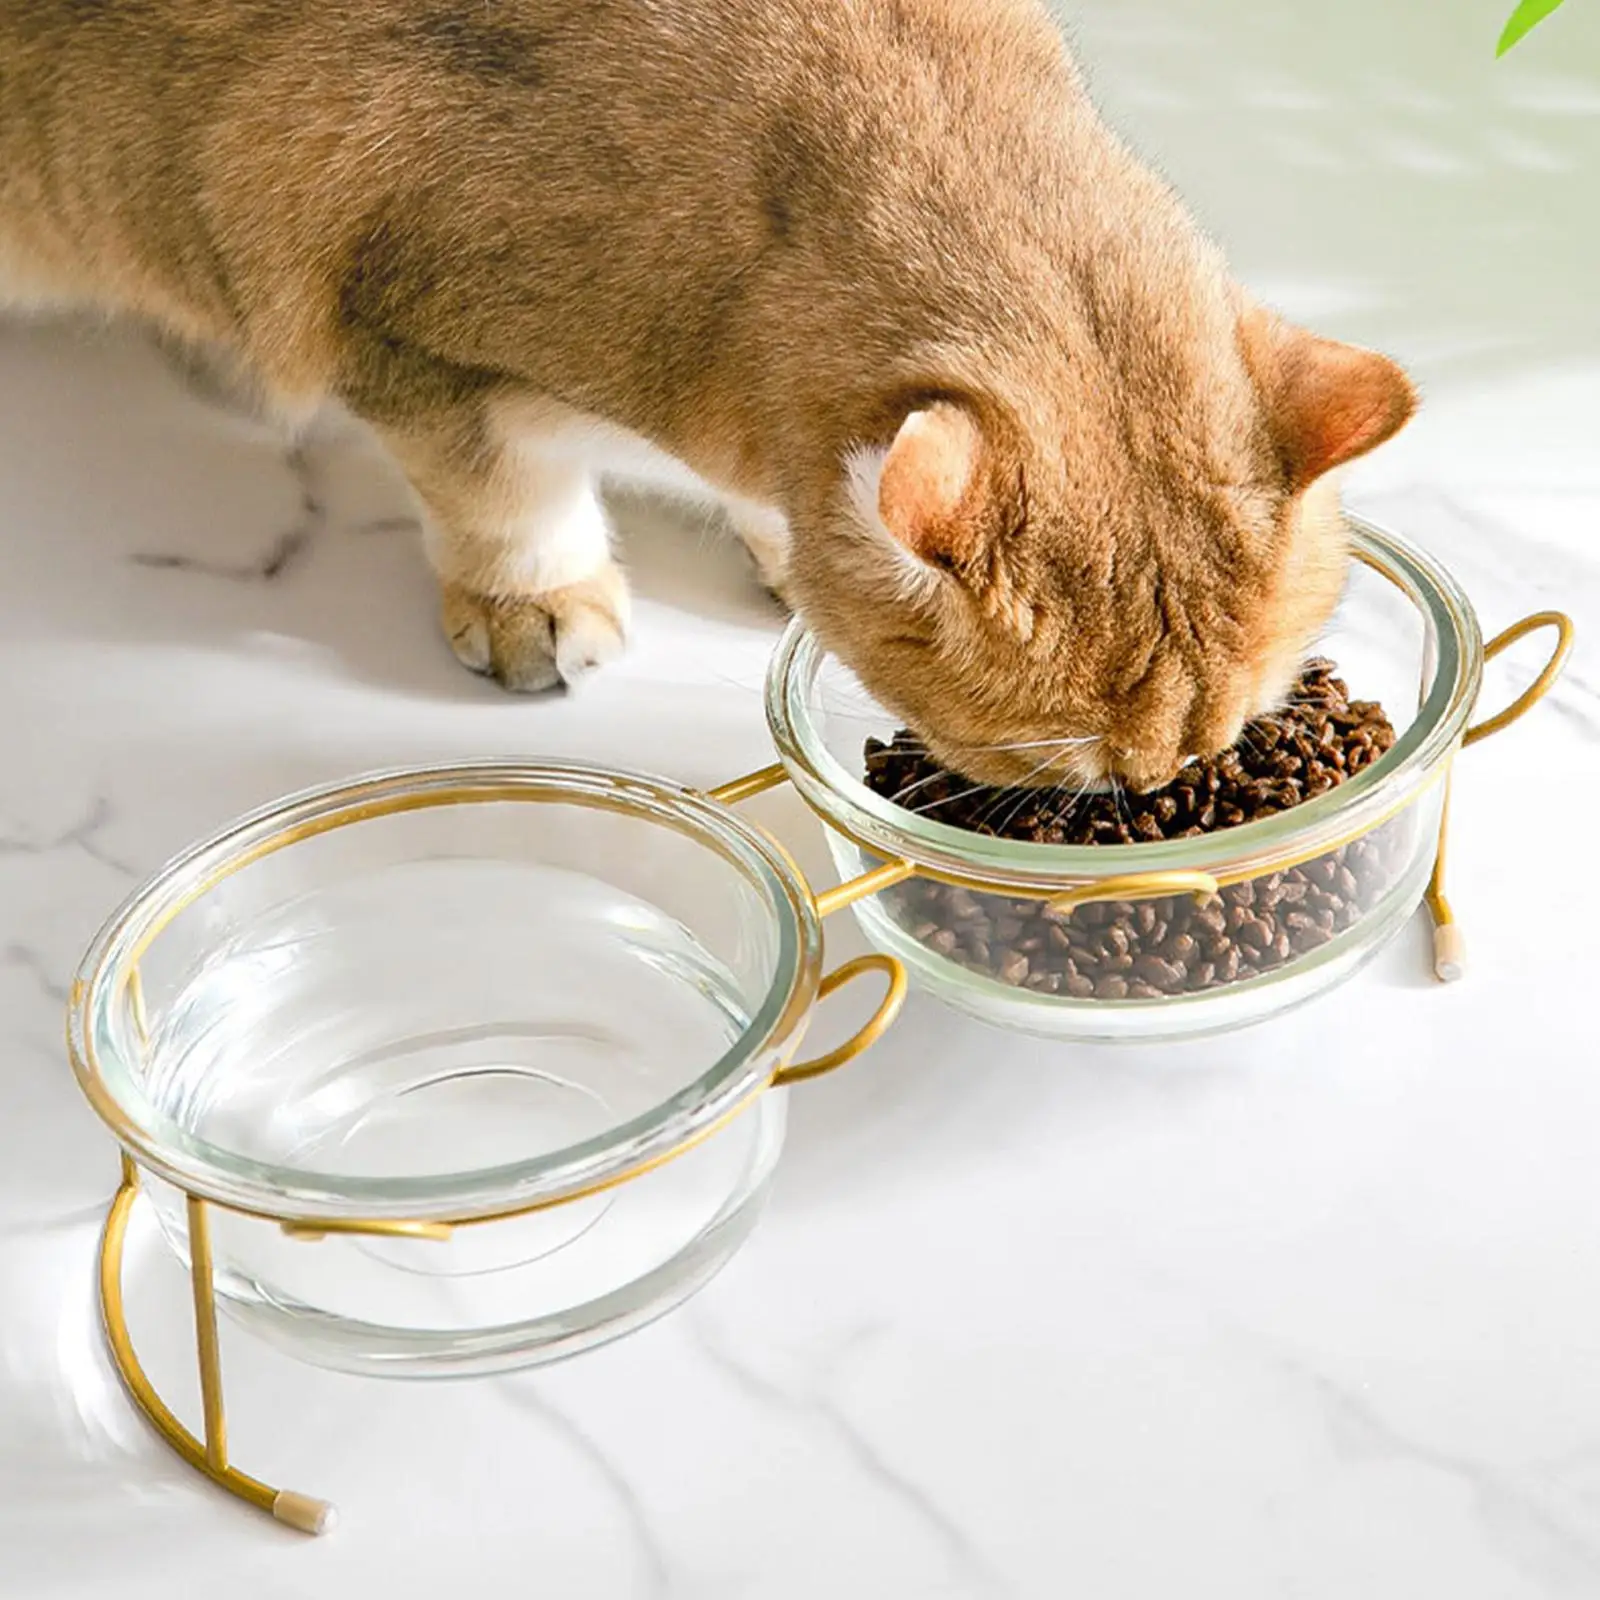 Double Glass Raised Cat Bowls Non- Bottom Water Feeder with Heighten Stand for Small Dog